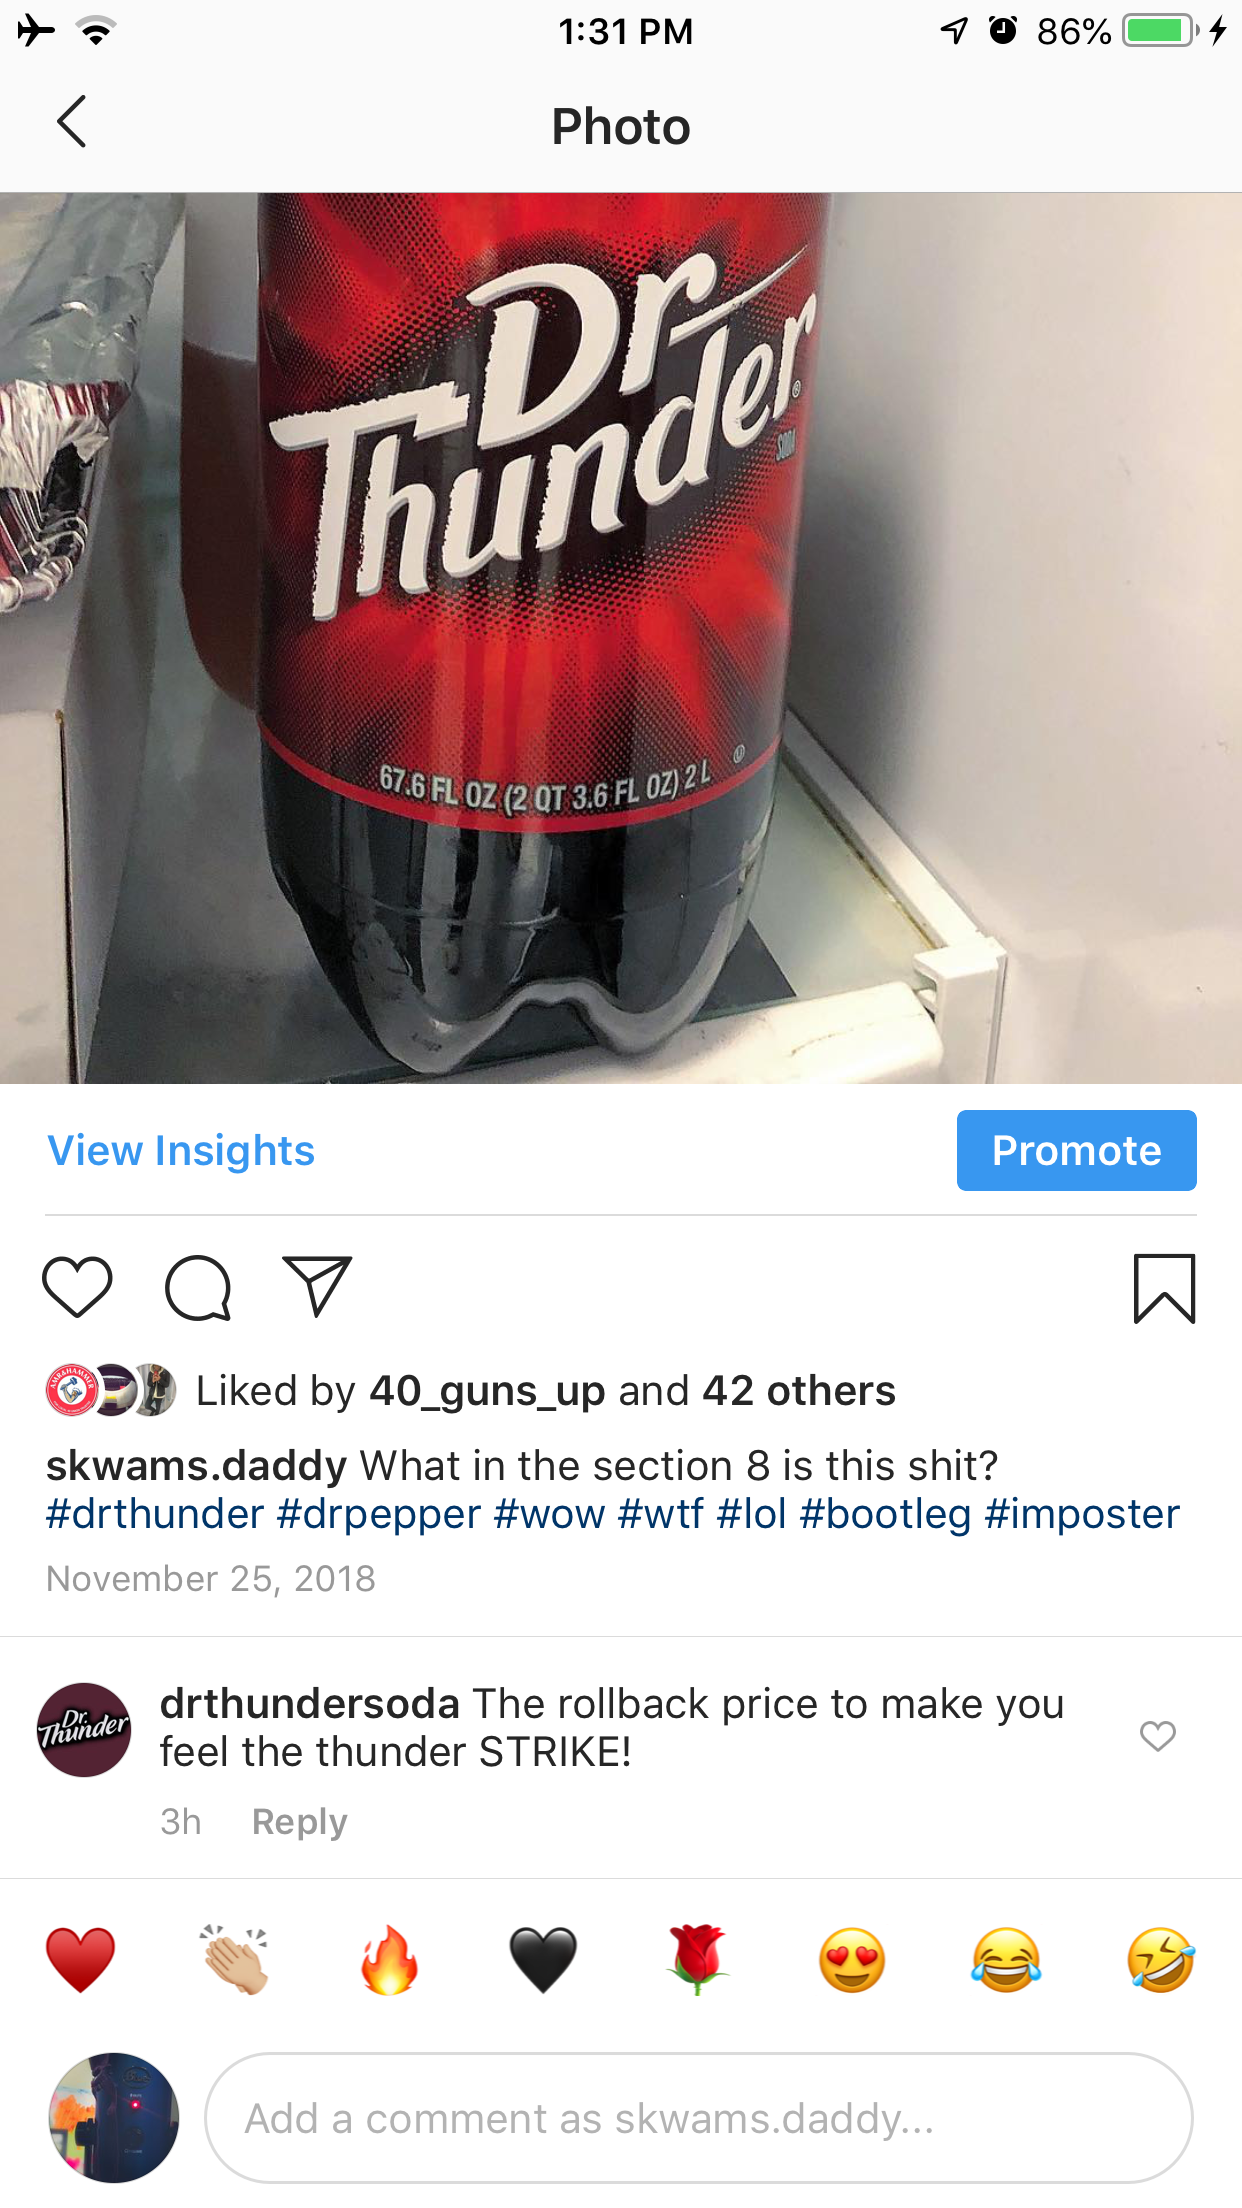 website - 10 86% Photo Jhunde View Insights Promote Qy d by 40_guns up and 42 others skwams.daddy What in the section 8 is this shit? trlol drthundersoda The rollback price to make you feel the thunder Strike! 3h Add a comment as svars.caddy